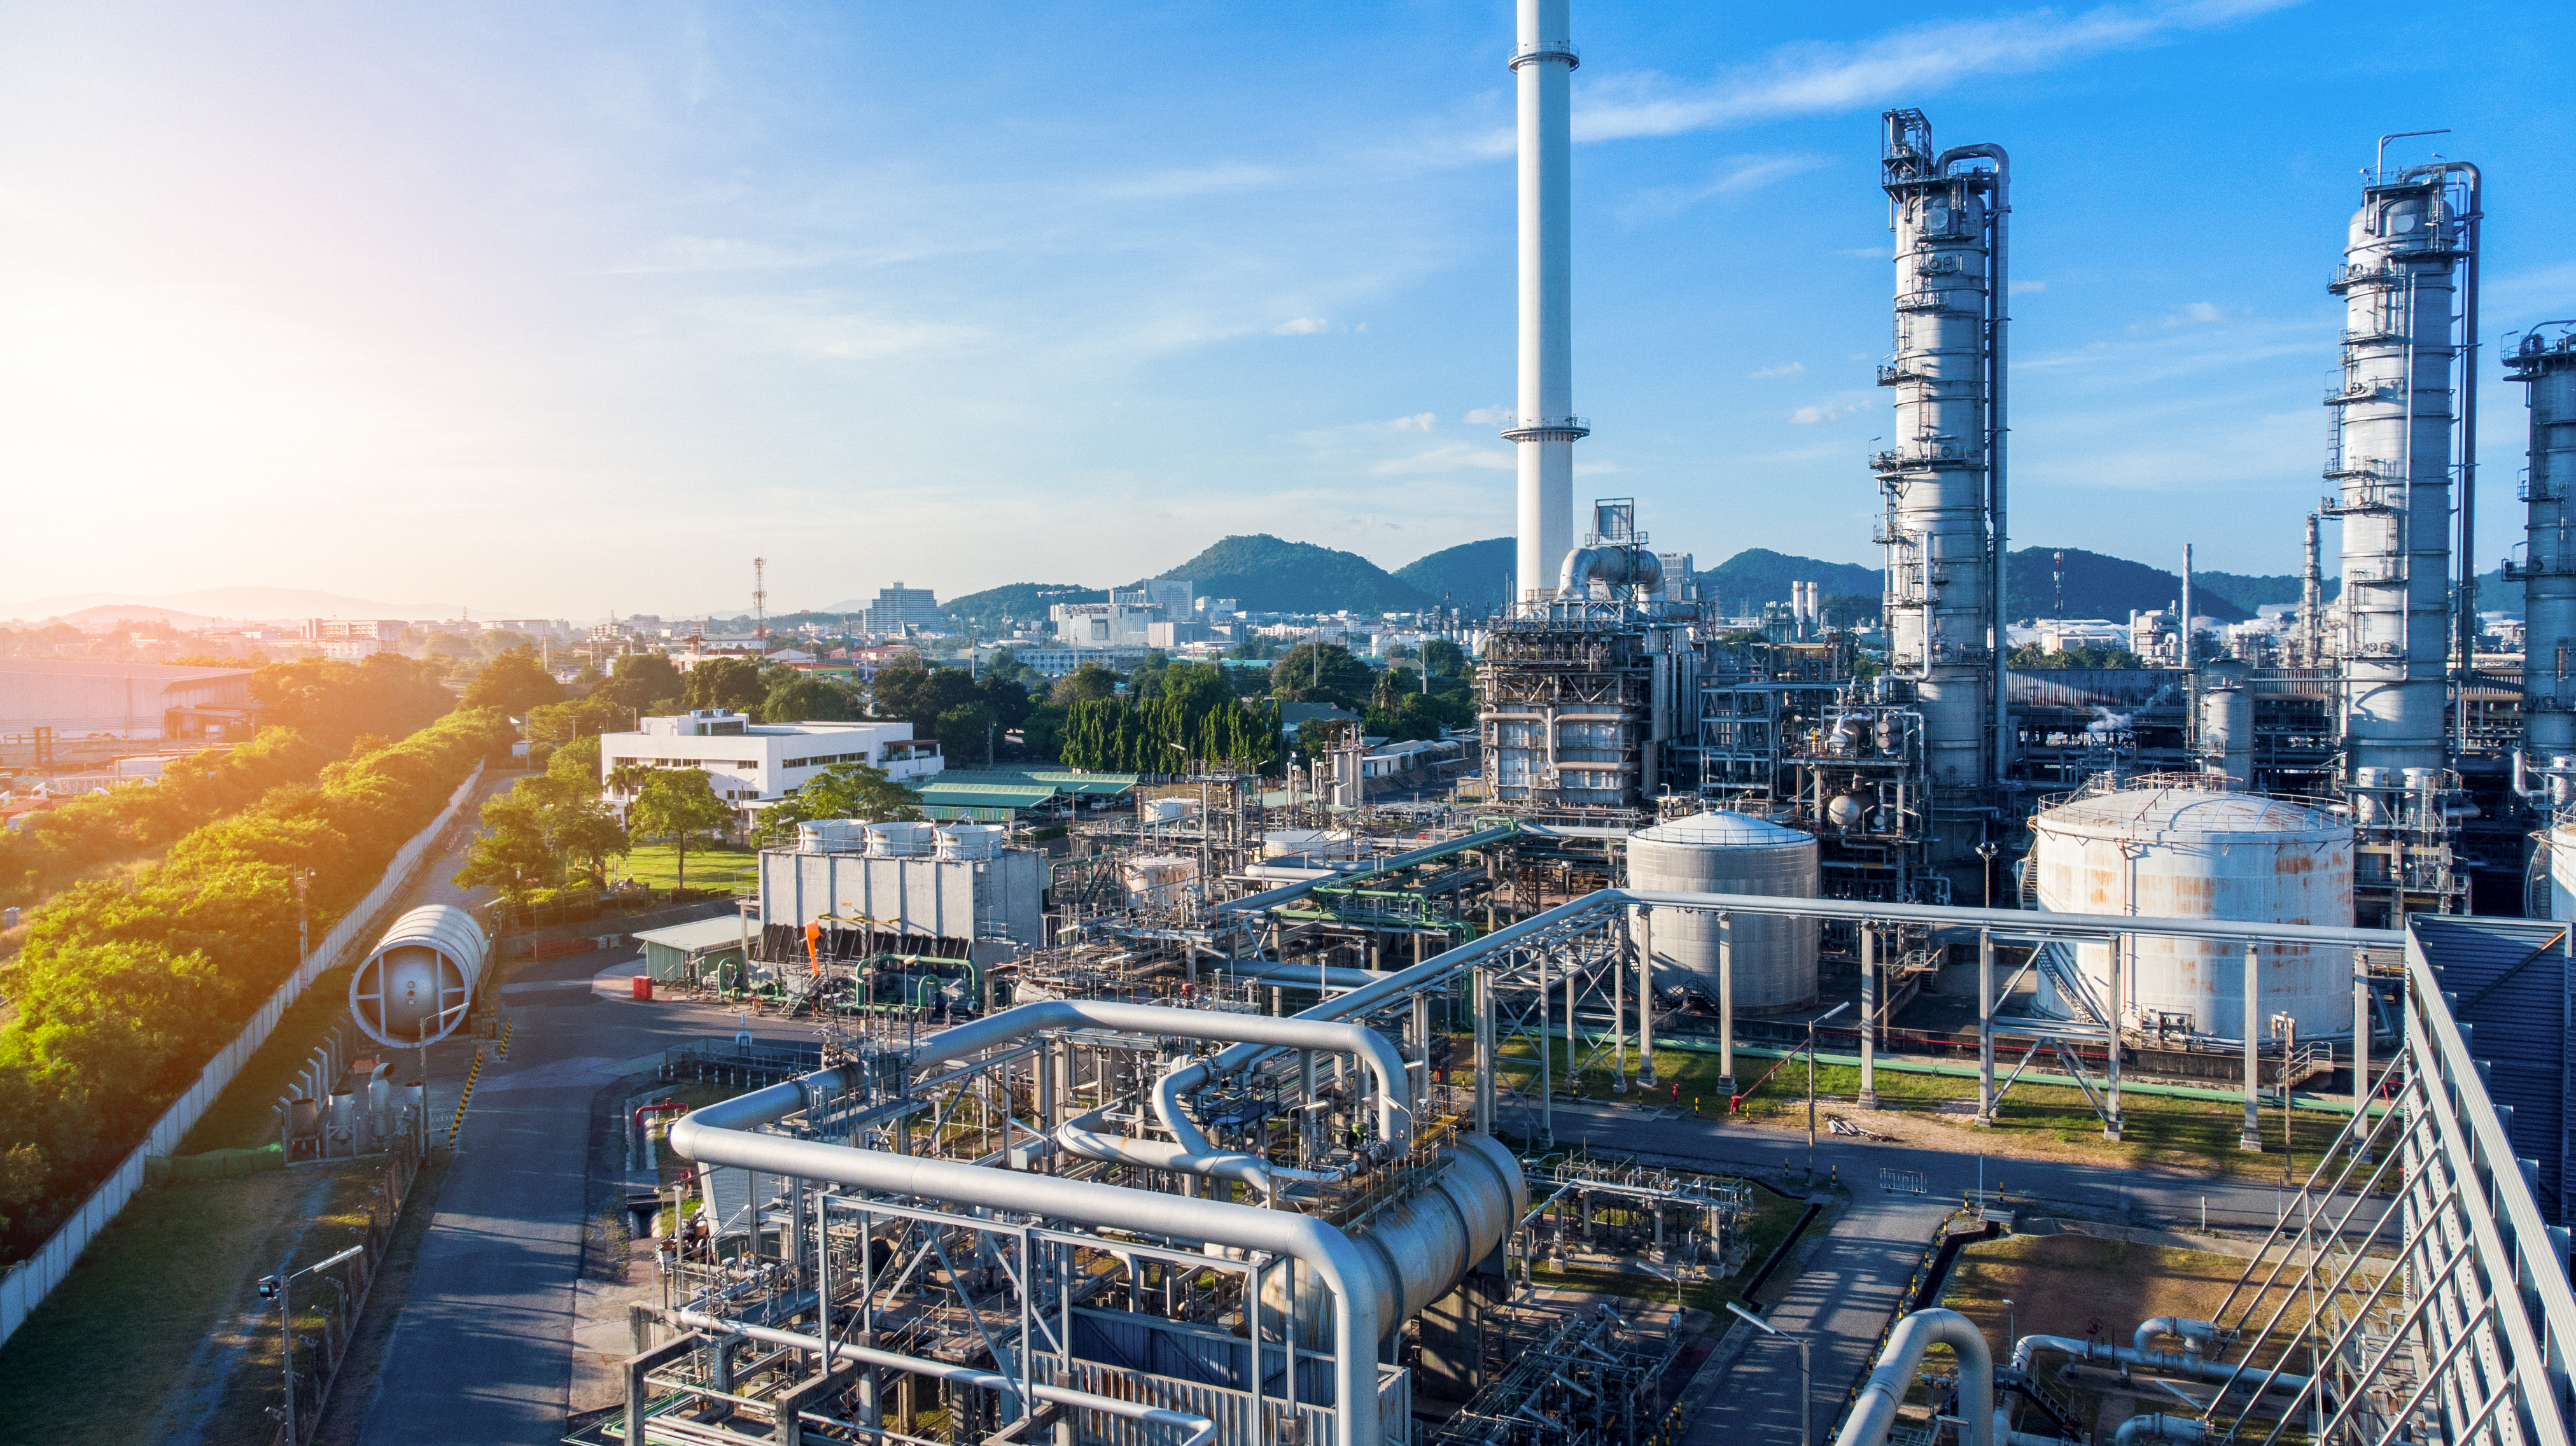 emmer Trots Ongunstig Refining and Petrochemical | Rockwell Automation